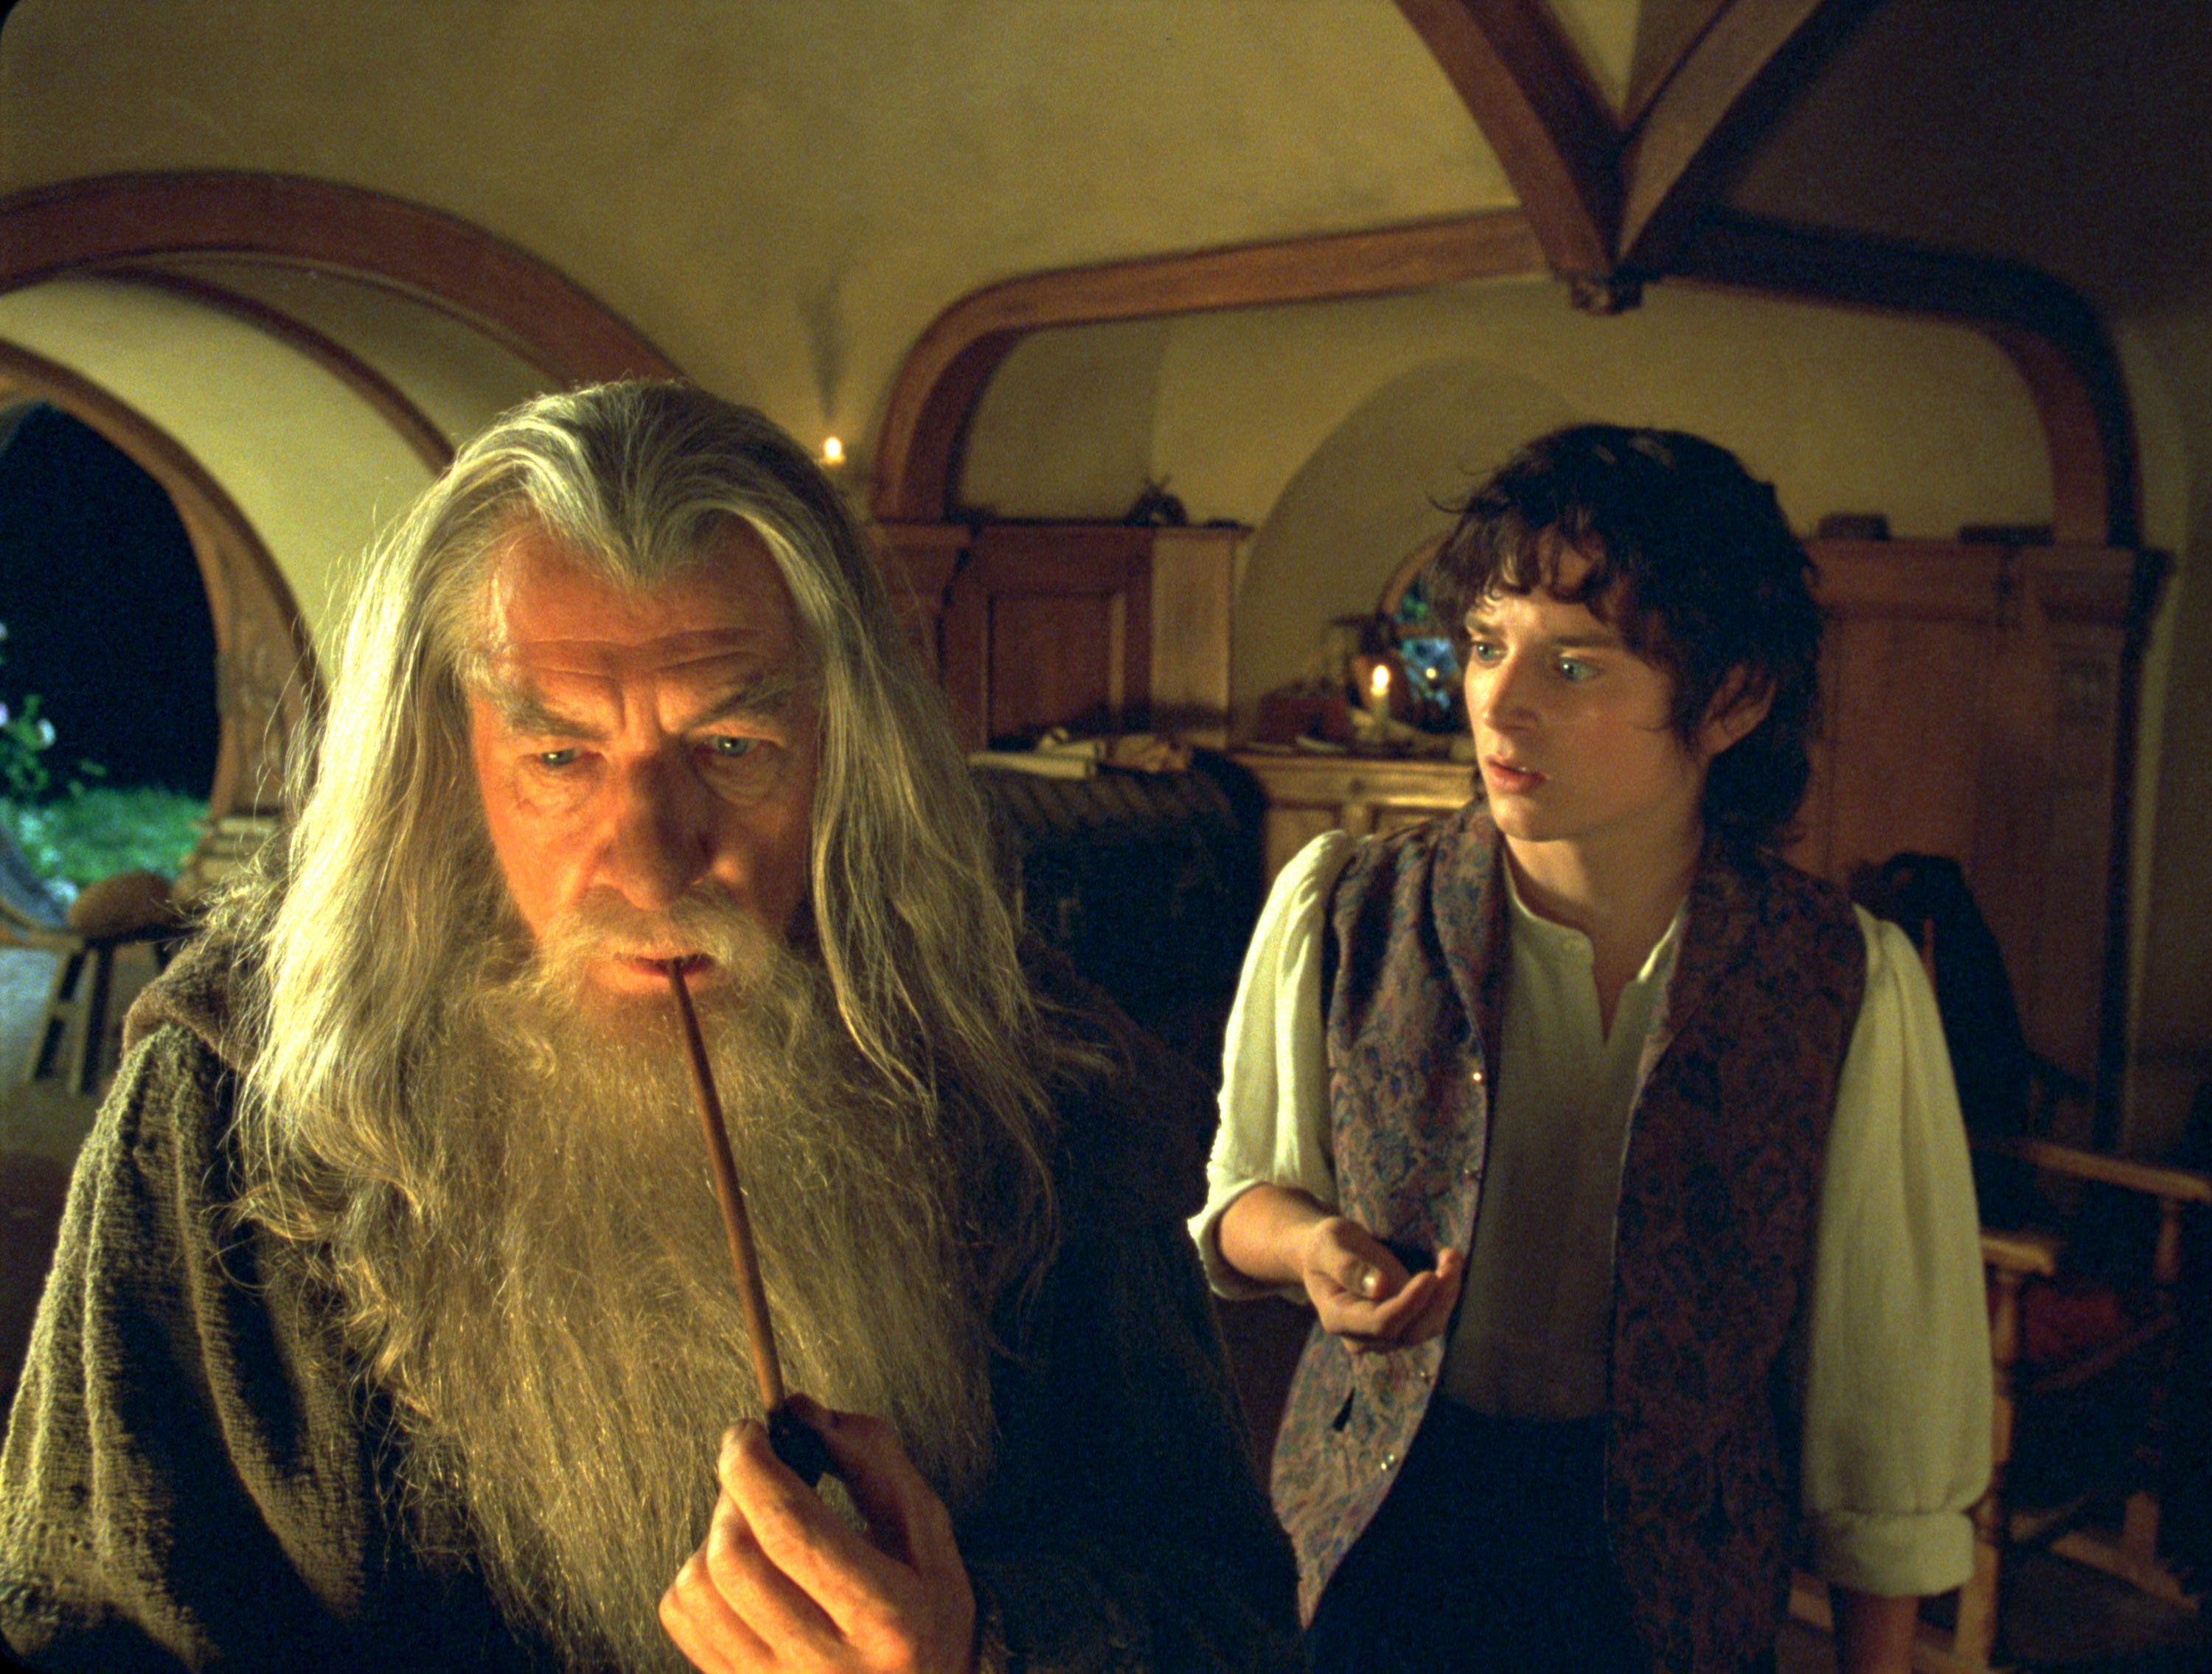 Ian McKellen and Elijah Wood as Gandalf and Frodo Baggins in 'The Lord of the Rings' movies, which are available to stream if you know where to look. Gandalf is holding his pipe to his mouth, and Frodo is looking at him while holding the One Ring.